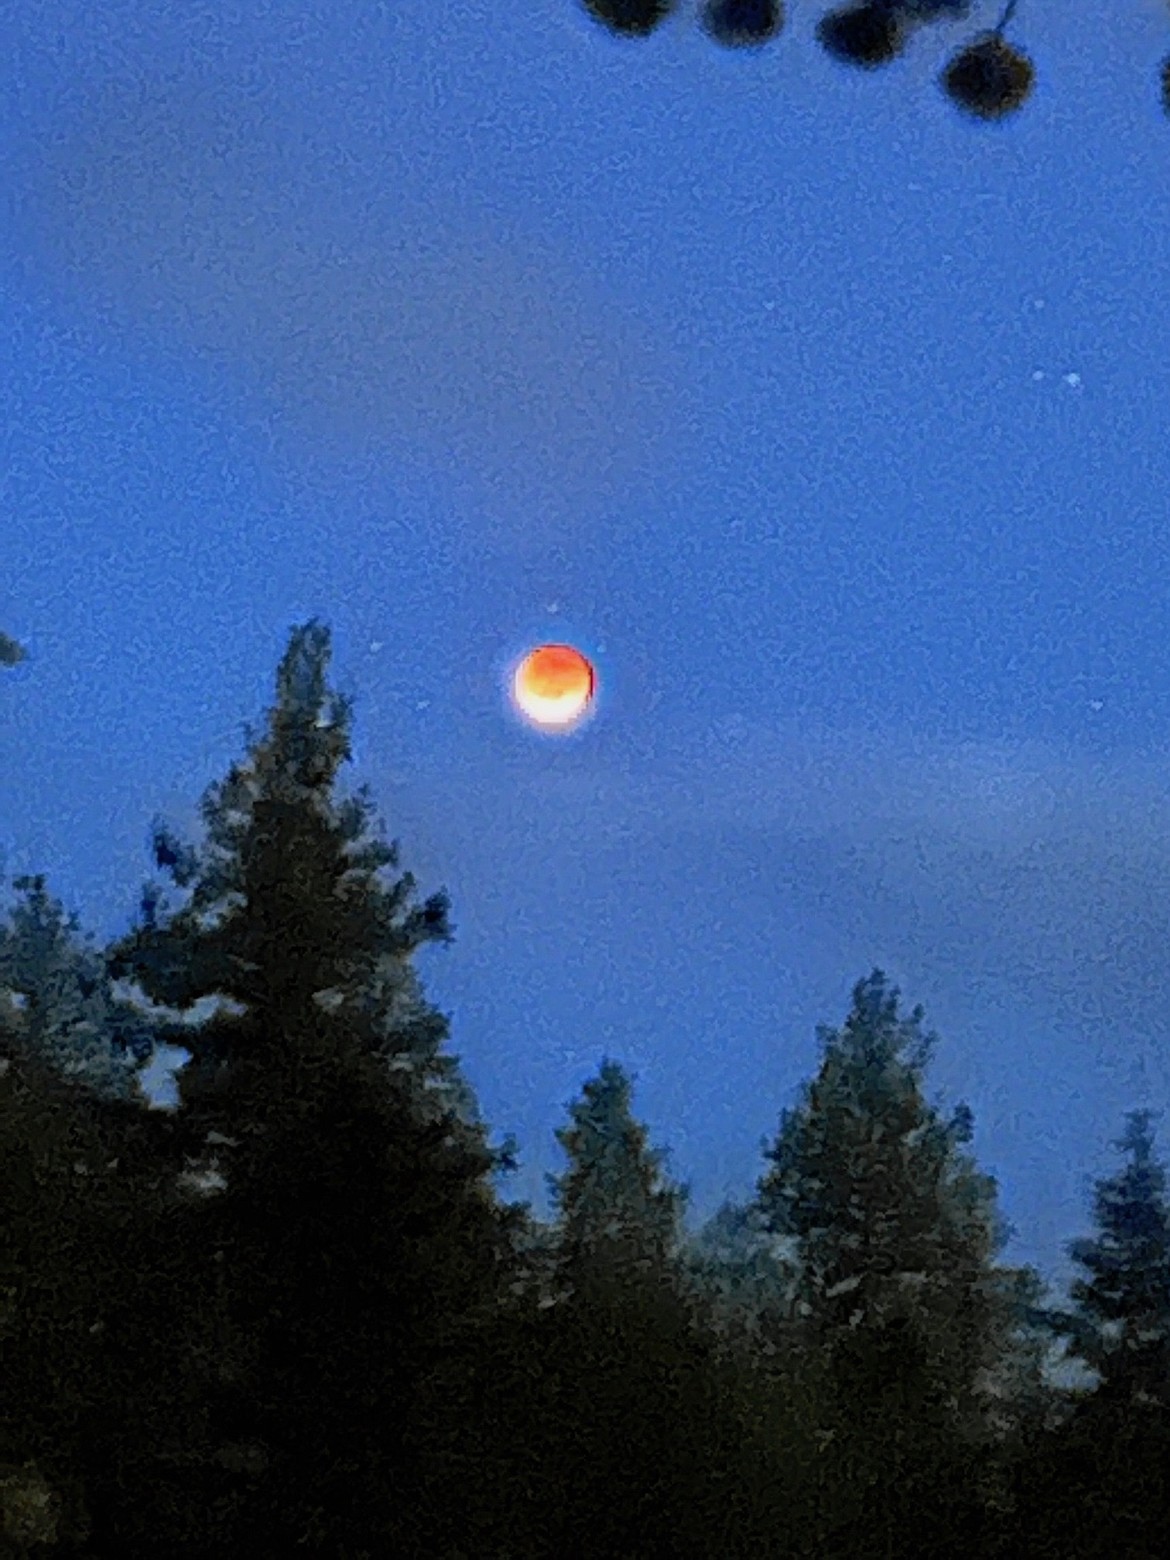 The clouds broke free around 9:45 p.m. Sunday for a short while right at the full lunar eclipse.